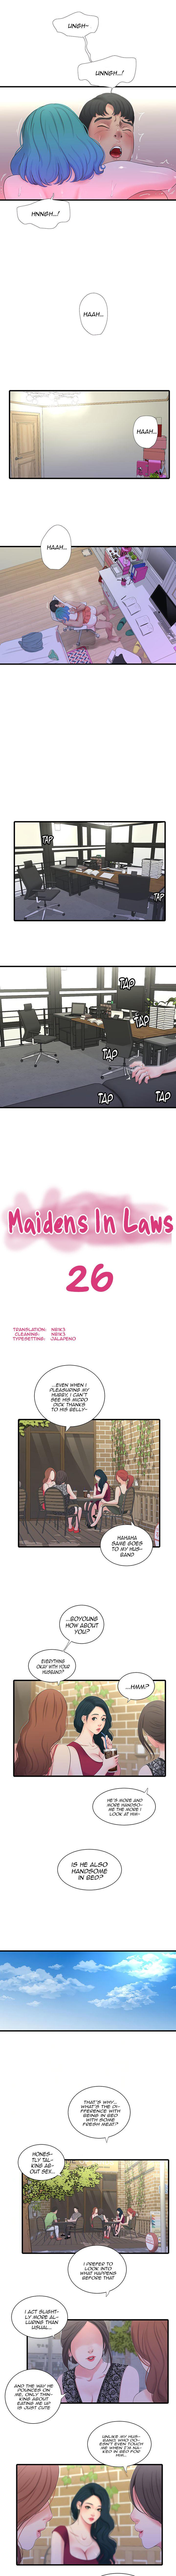 Sexcams Maidens In-Law | One's In-Laws Virgins Ch. 26-30 [English] Money - Picture 2